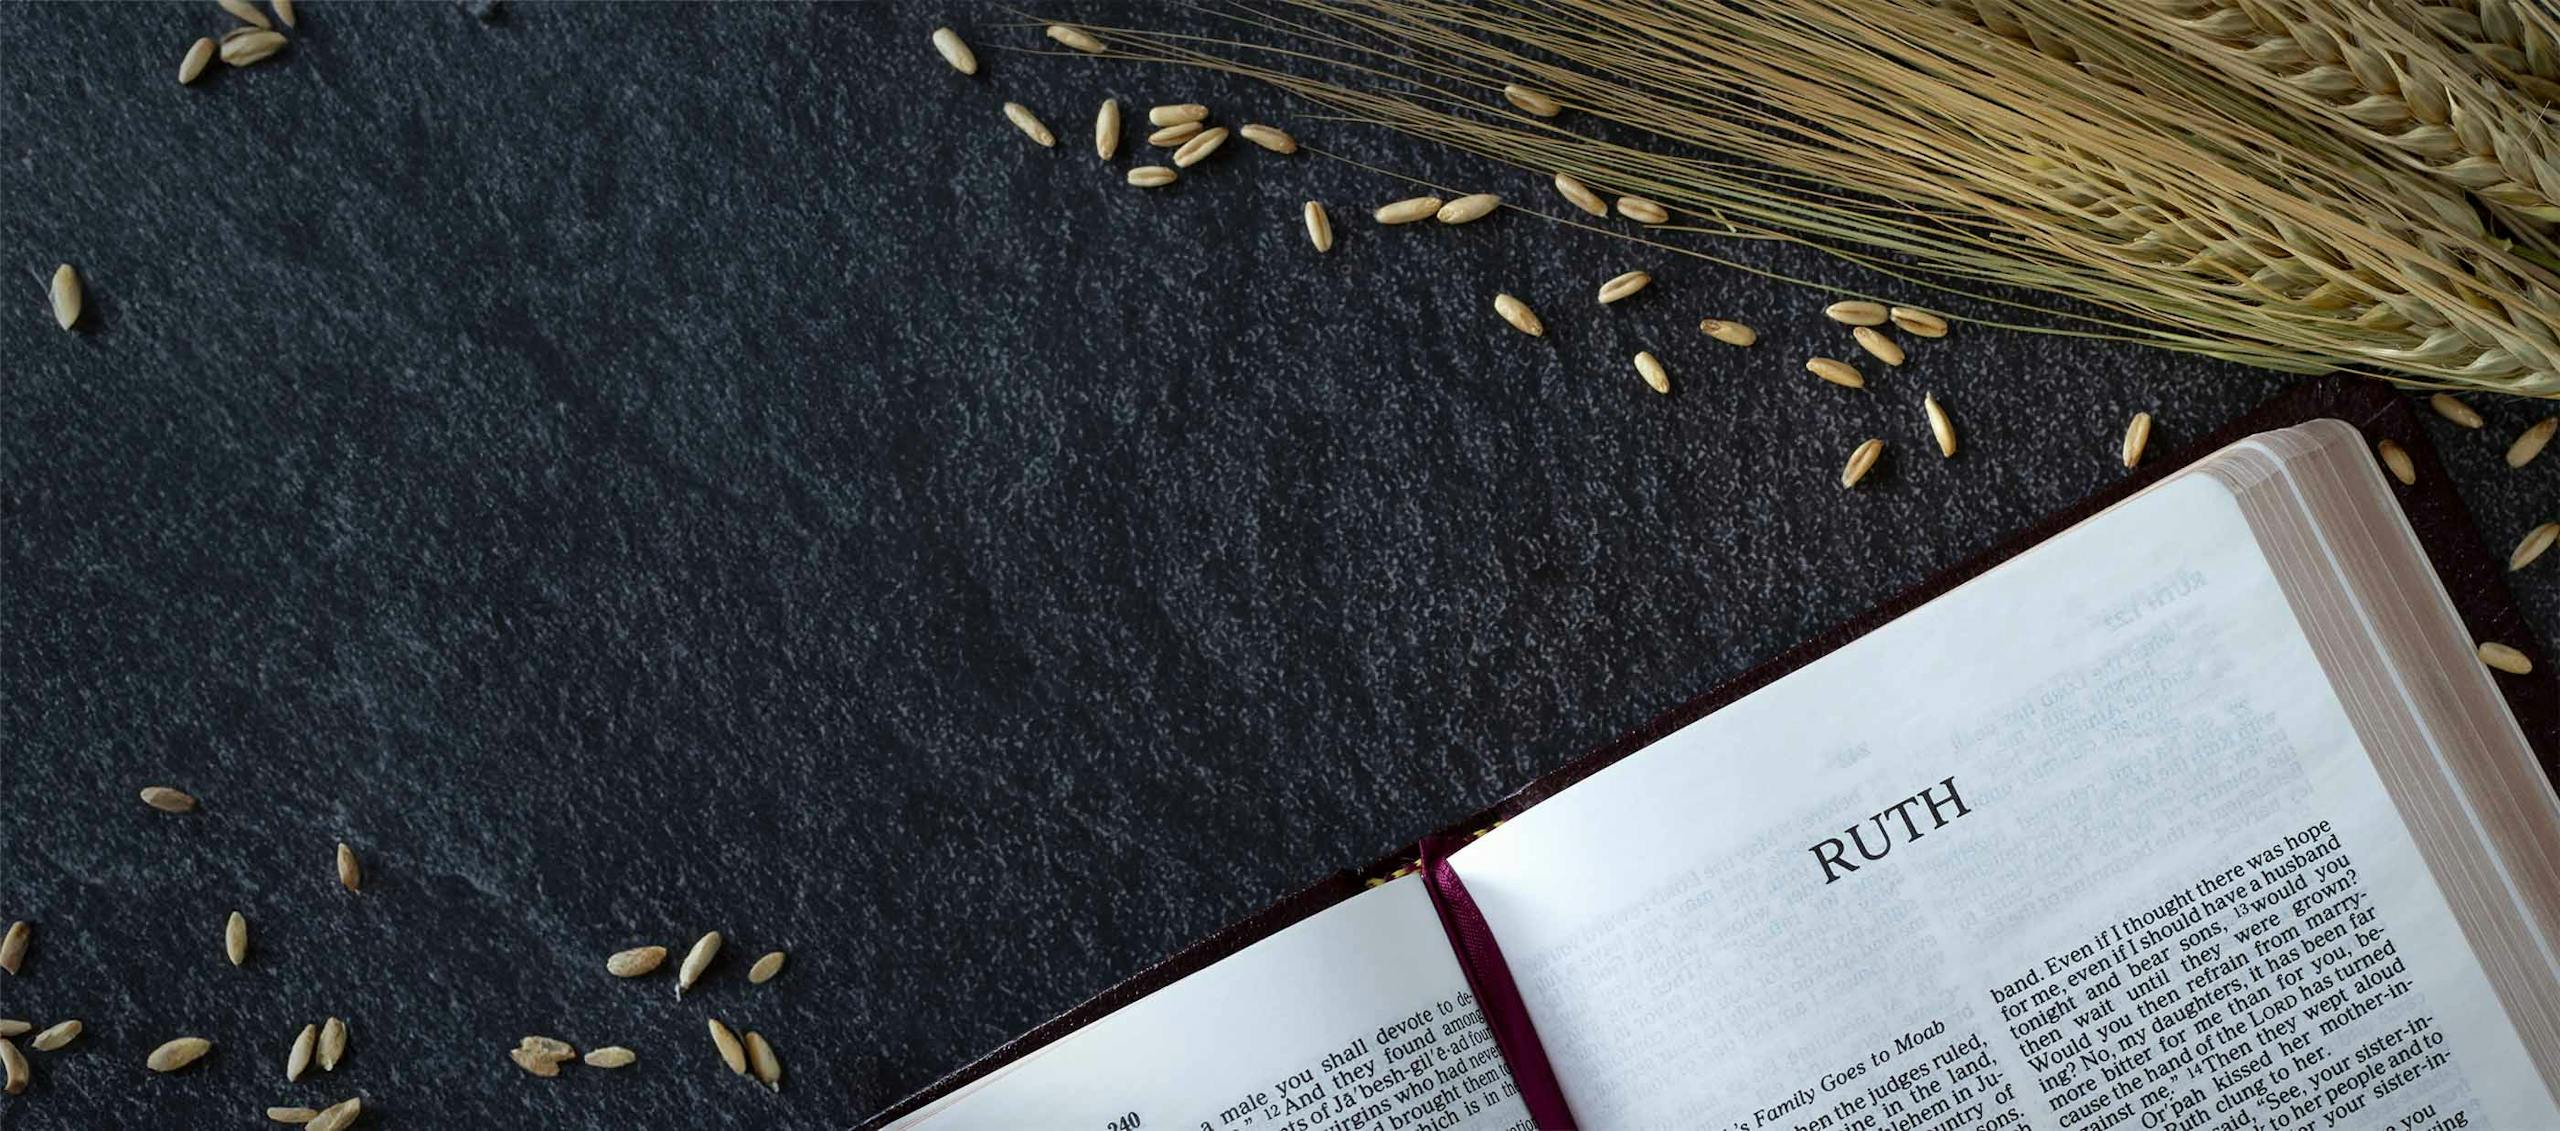 Book of Ruth on table with wheat